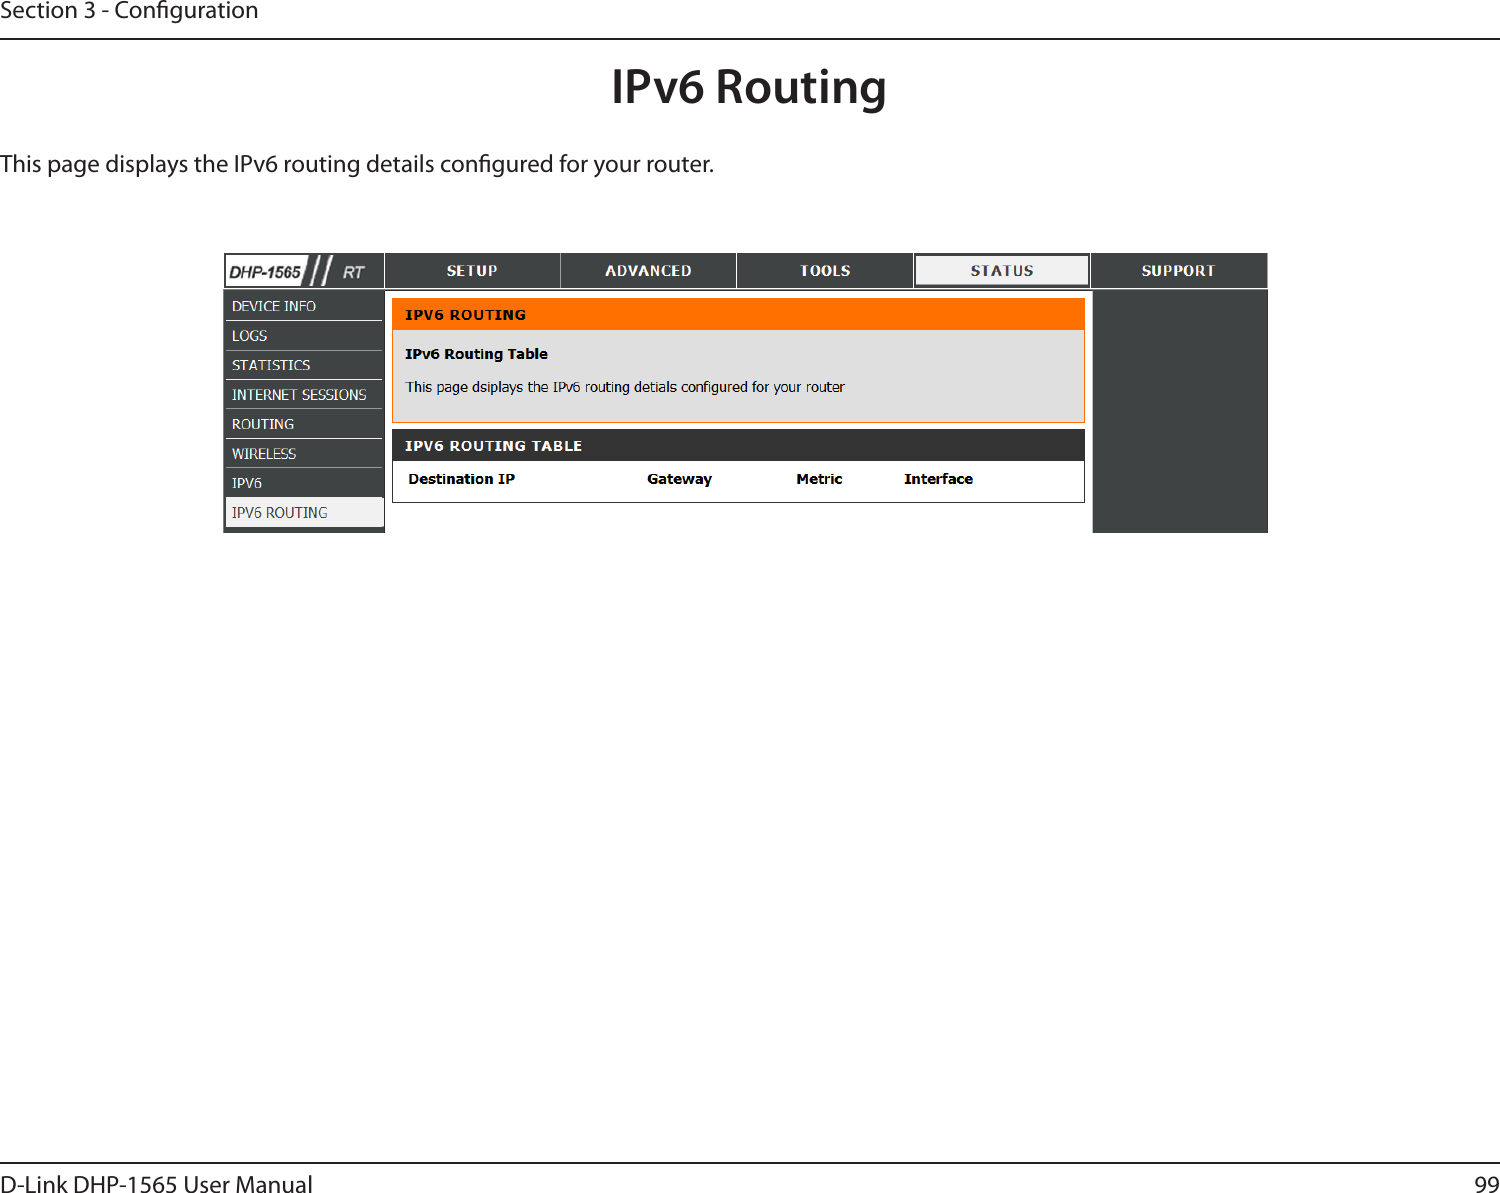 99D-Link DHP-1565 User ManualSection 3 - CongurationIPv6 RoutingThis page displays the IPv6 routing details congured for your router. 